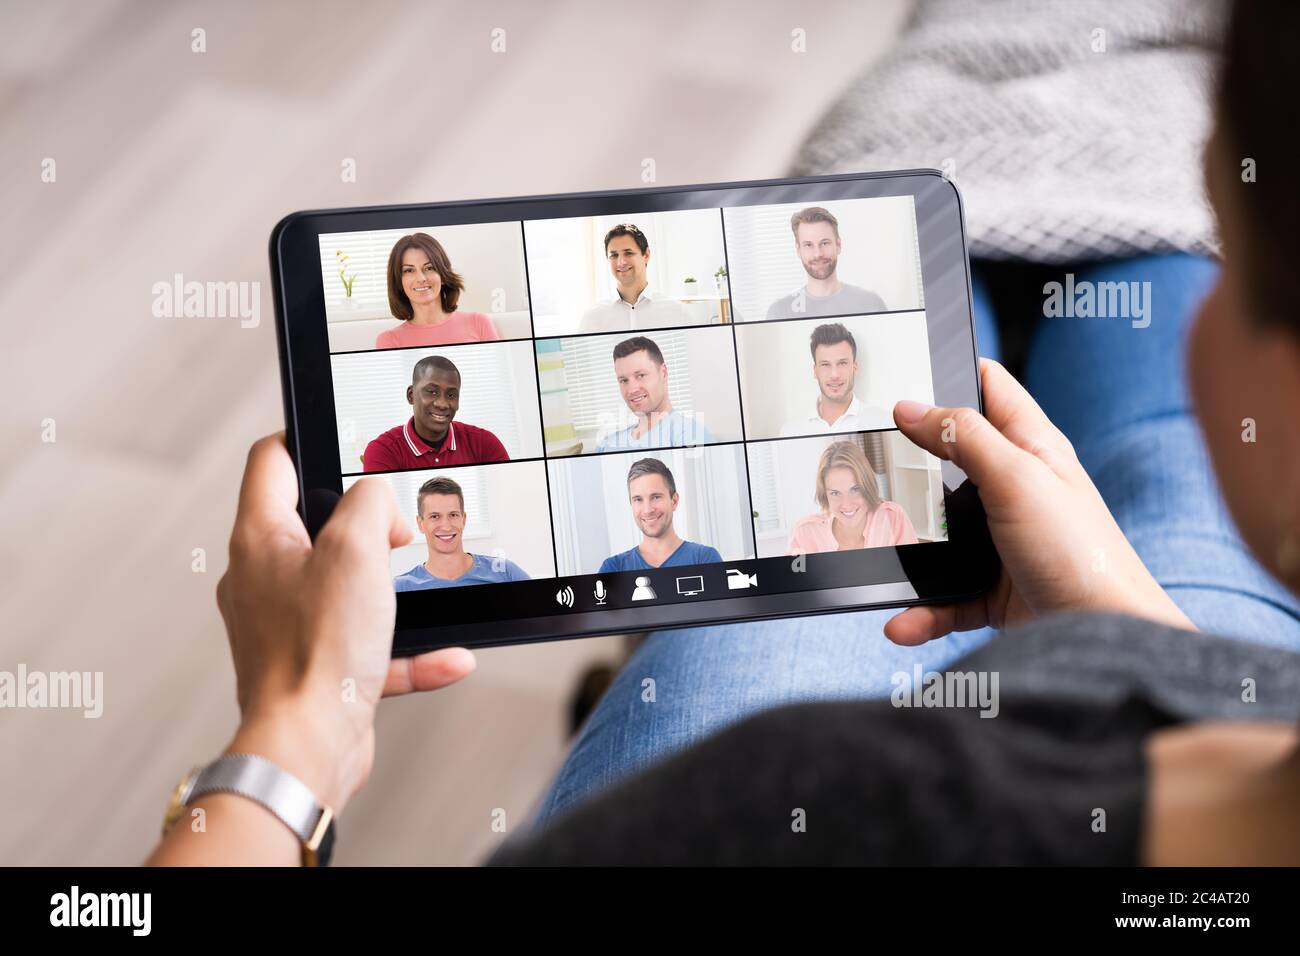 Online Video Conference Interview Meeting On Tablet Stock Photo - Alamy